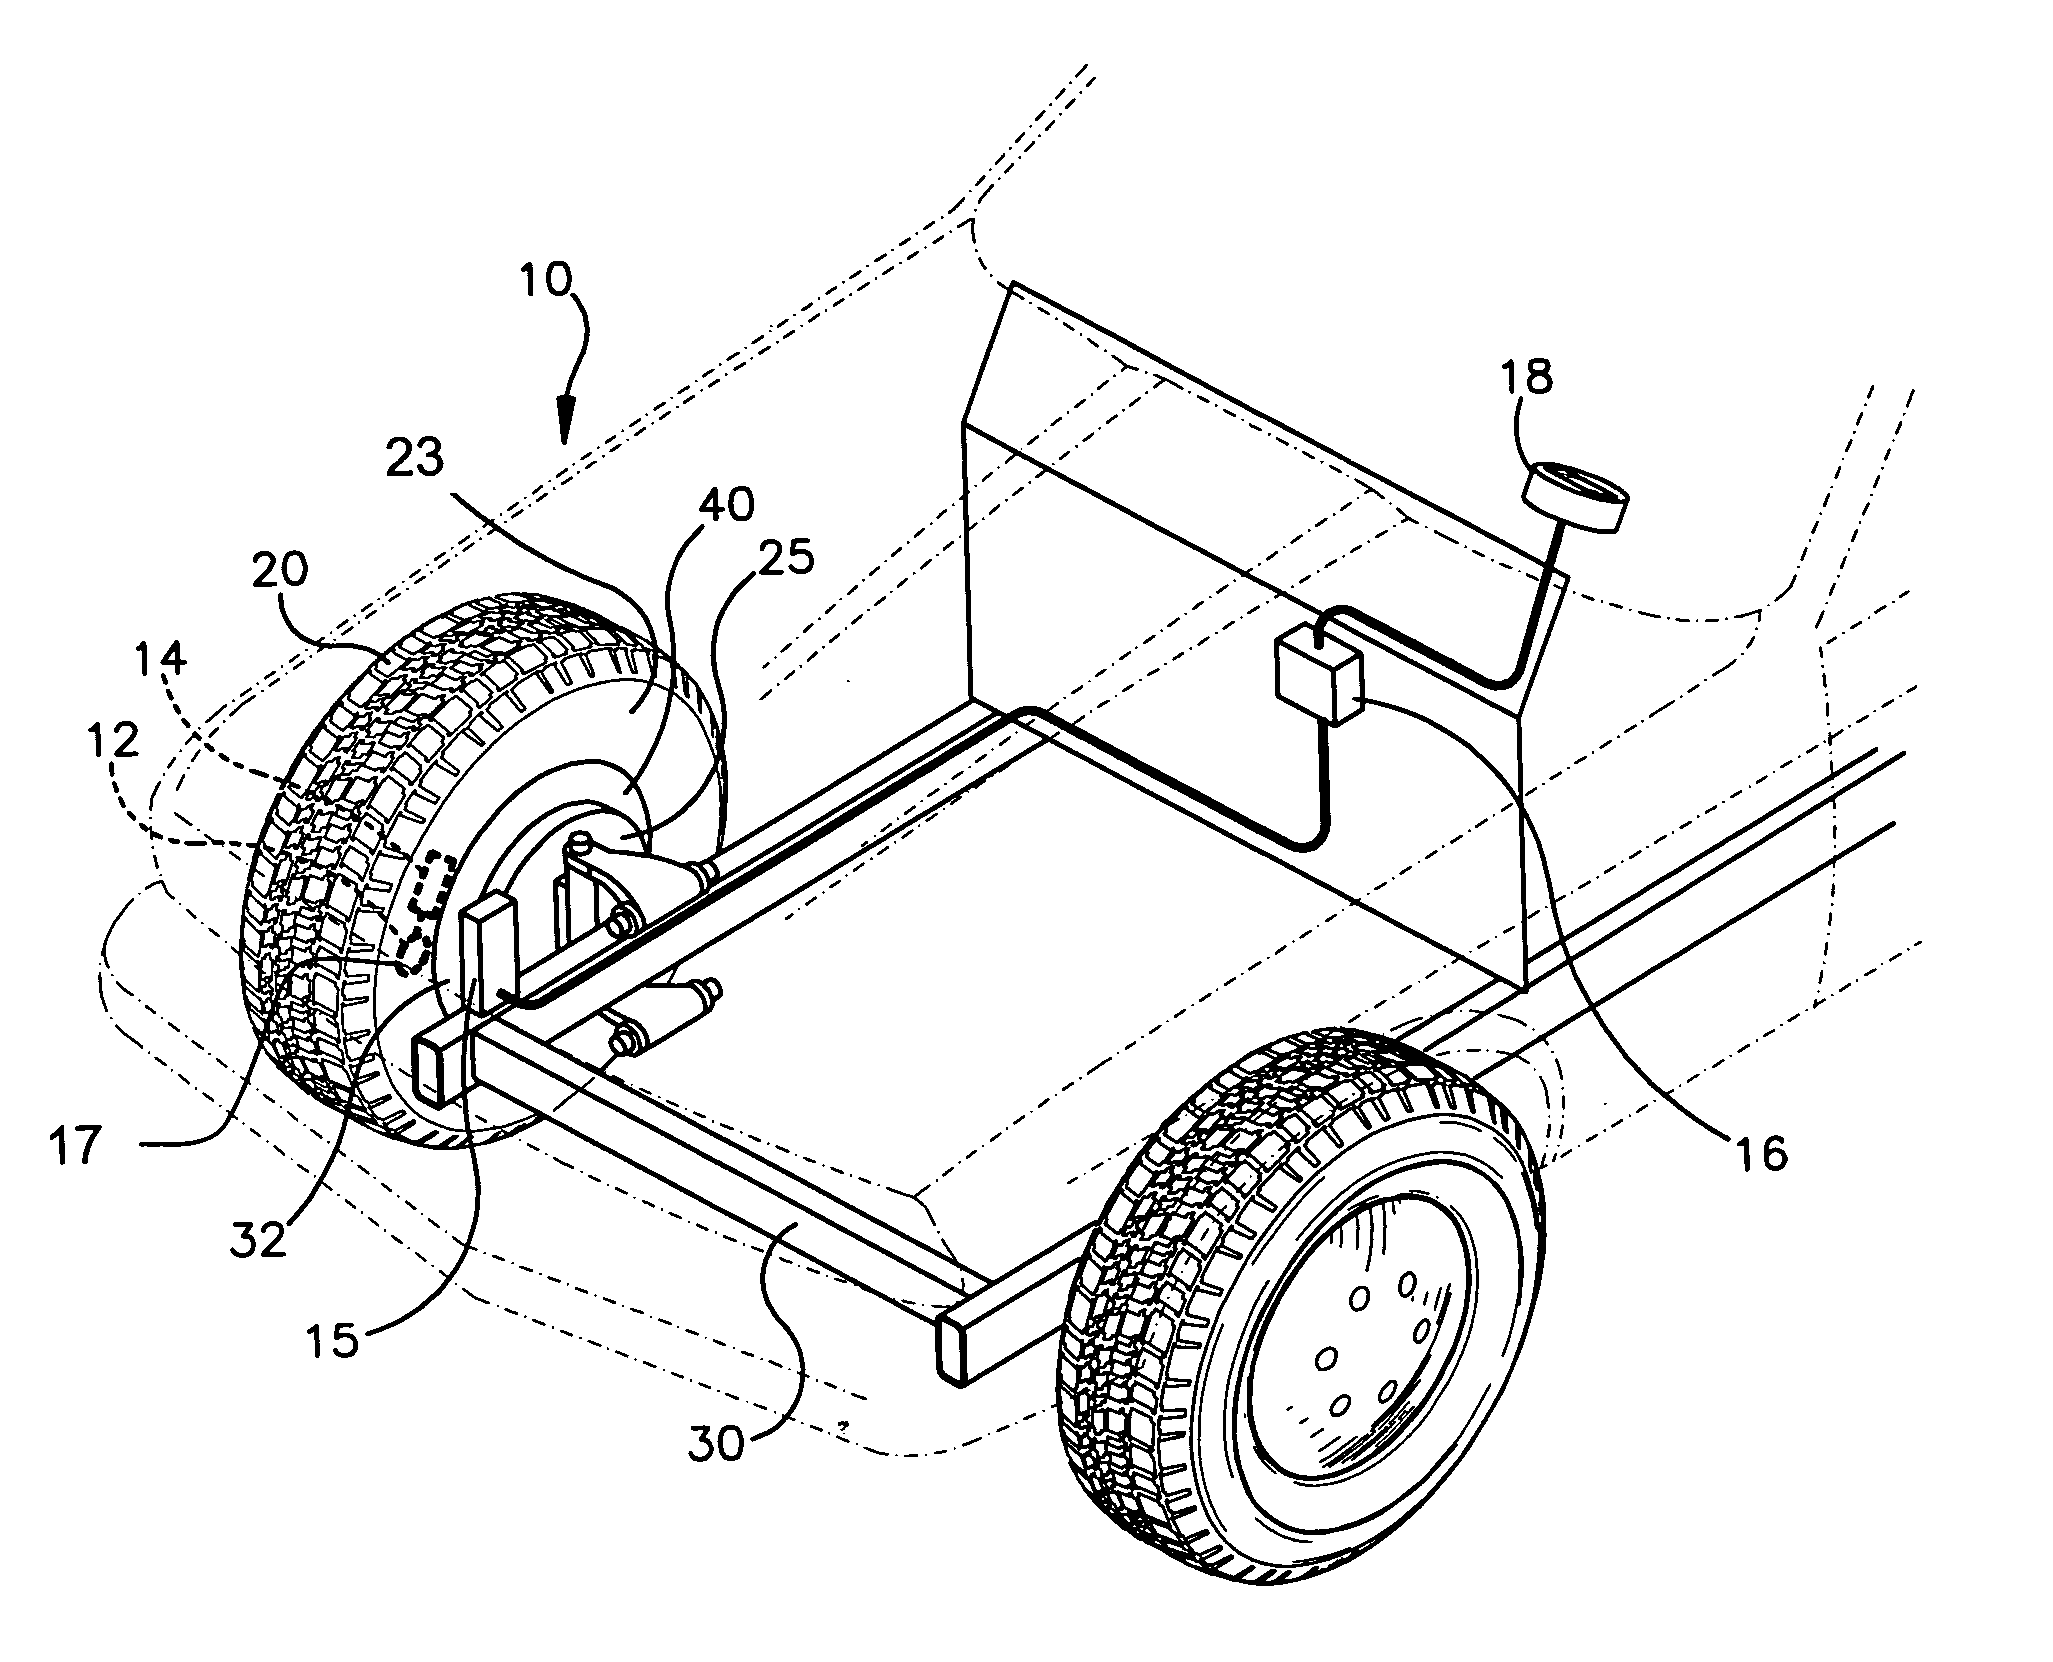 Magnetic transmitter and receiver for a tire pressure monitoring system